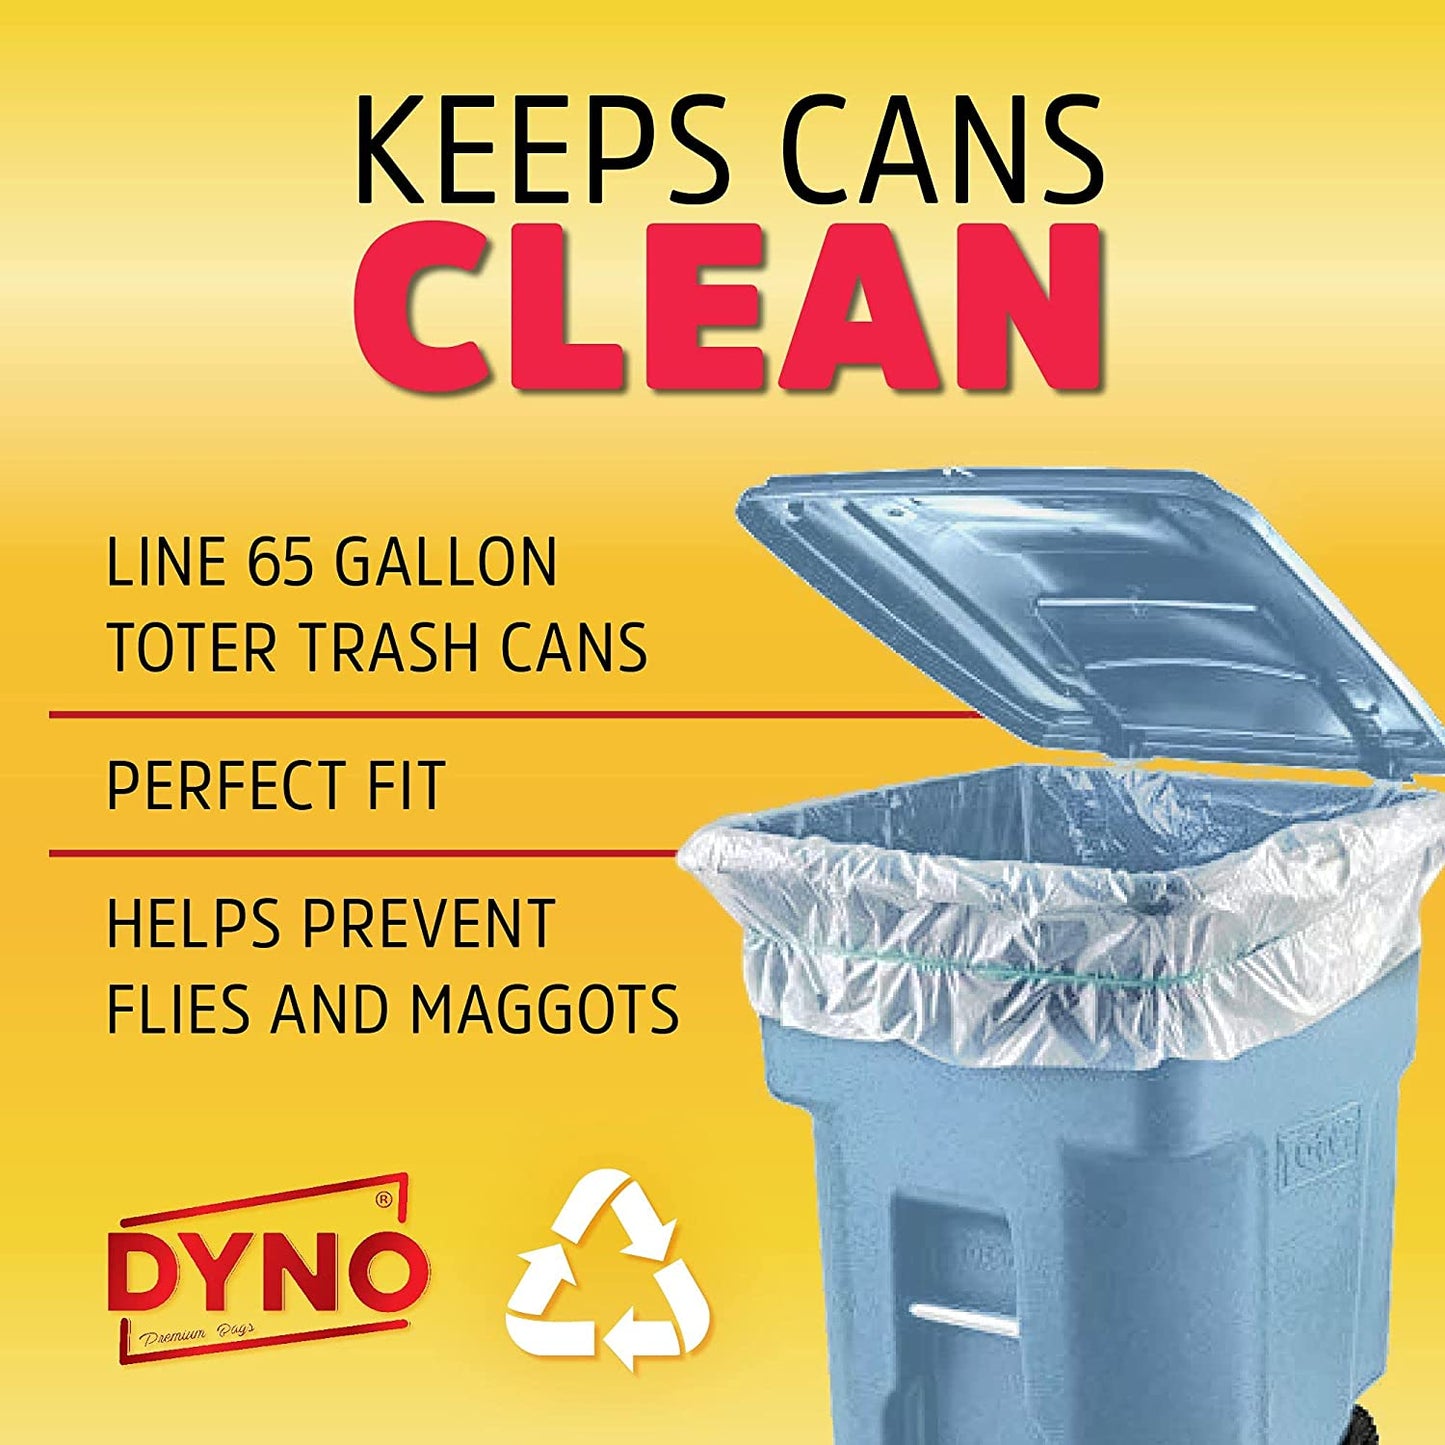 Dyno Products Online 65-Gallon, 1.5 Mil Thick Heavy-Duty Clear Trash Bags - 30 Count Extra Large Plastic Garbage Liners Fit Huge Cans for Home Garden Lawn Yard Recycling Construction & Commercial Use